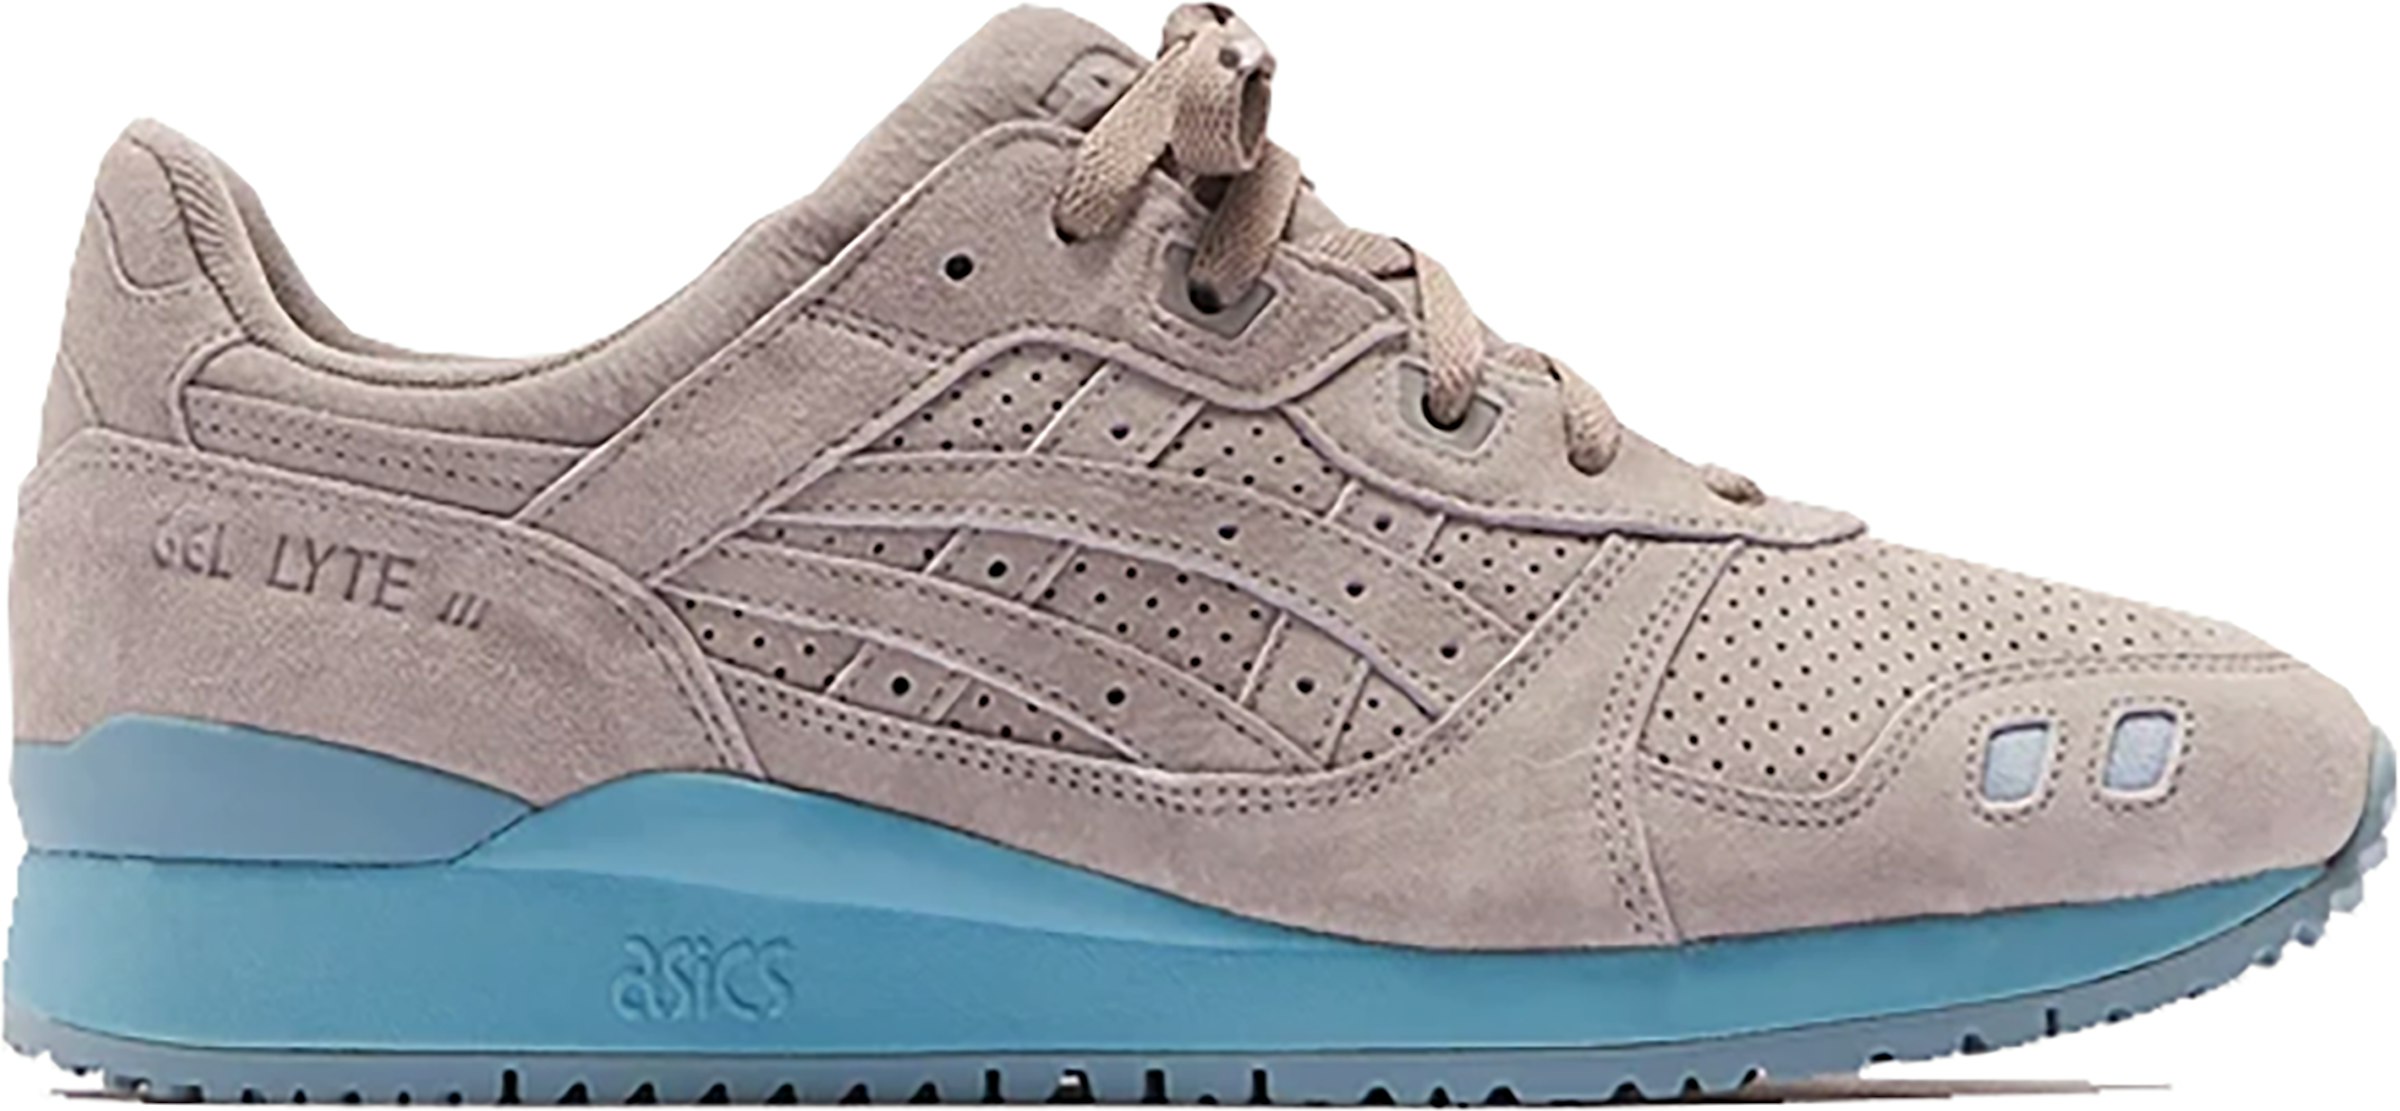 ASICS Gel-Lyte Ronnie The Palette Astro - 1201A224-206 - US